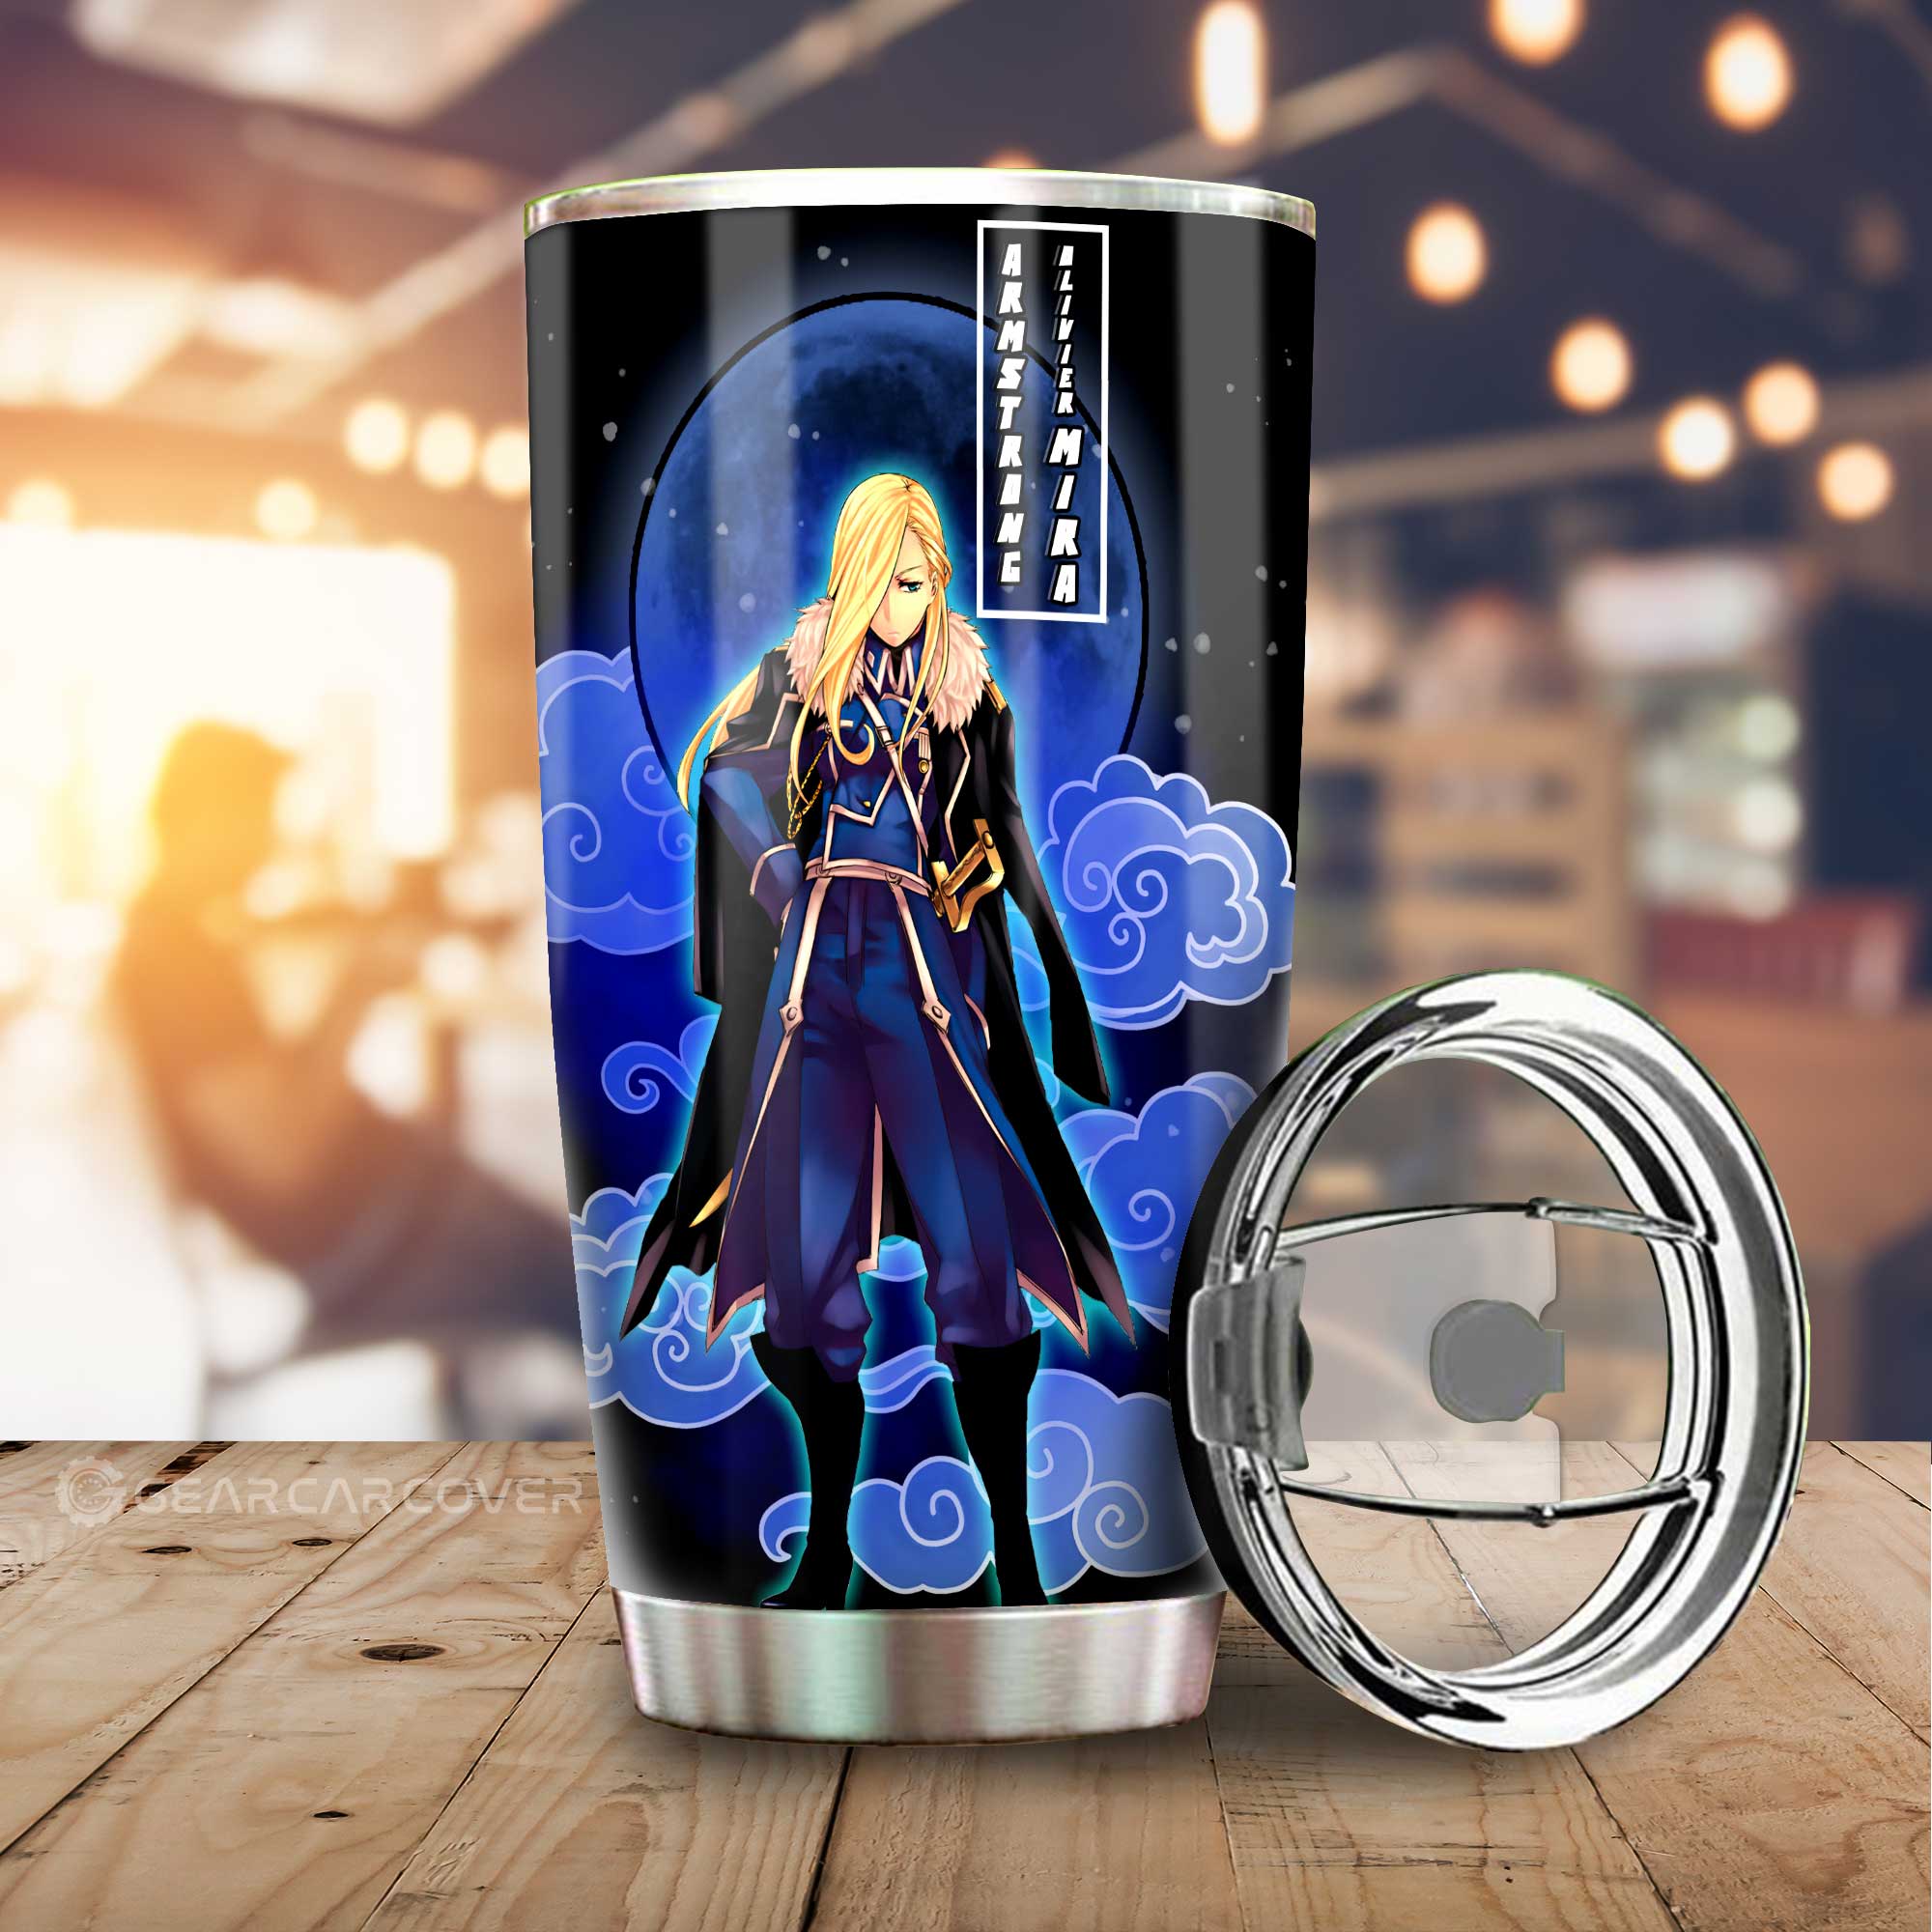 Olivier Mira Armstrong Tumbler Cup Custom Fullmetal Alchemist Anime Car Interior Accessories - Gearcarcover - 1